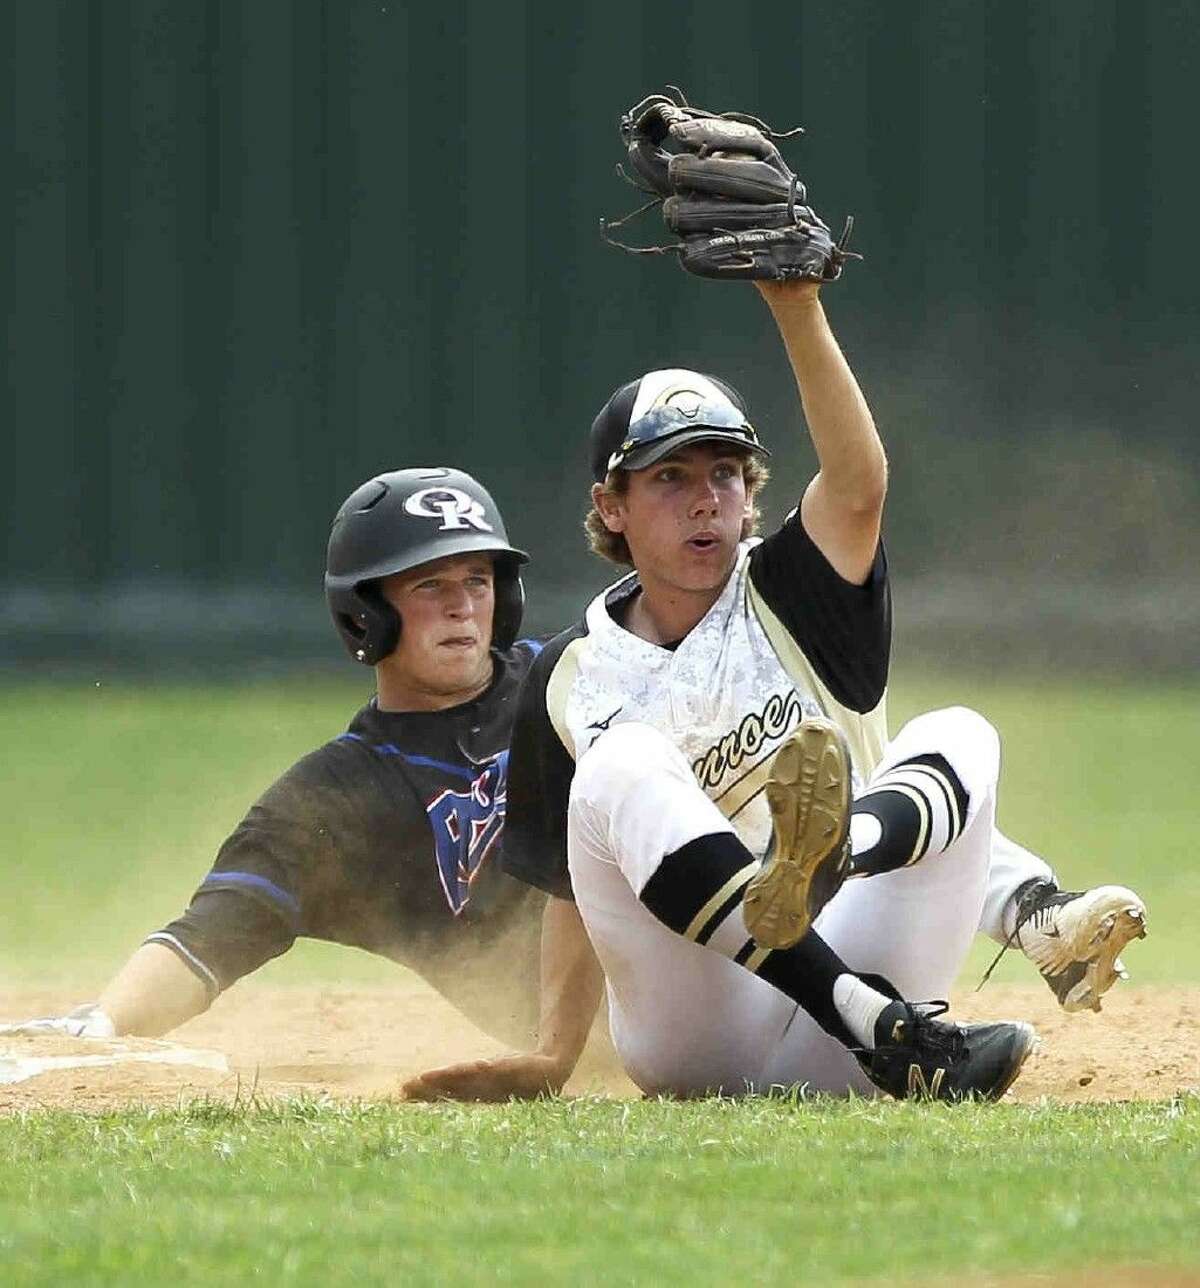 Conroe second baseman Dawson Shibley holds up his glove as he and Oak Ridge base runner Tyler Hicks look for a call during a District 16-6A baseball game Friday. Go to HCNpics.com to purchase this photo and others like it.